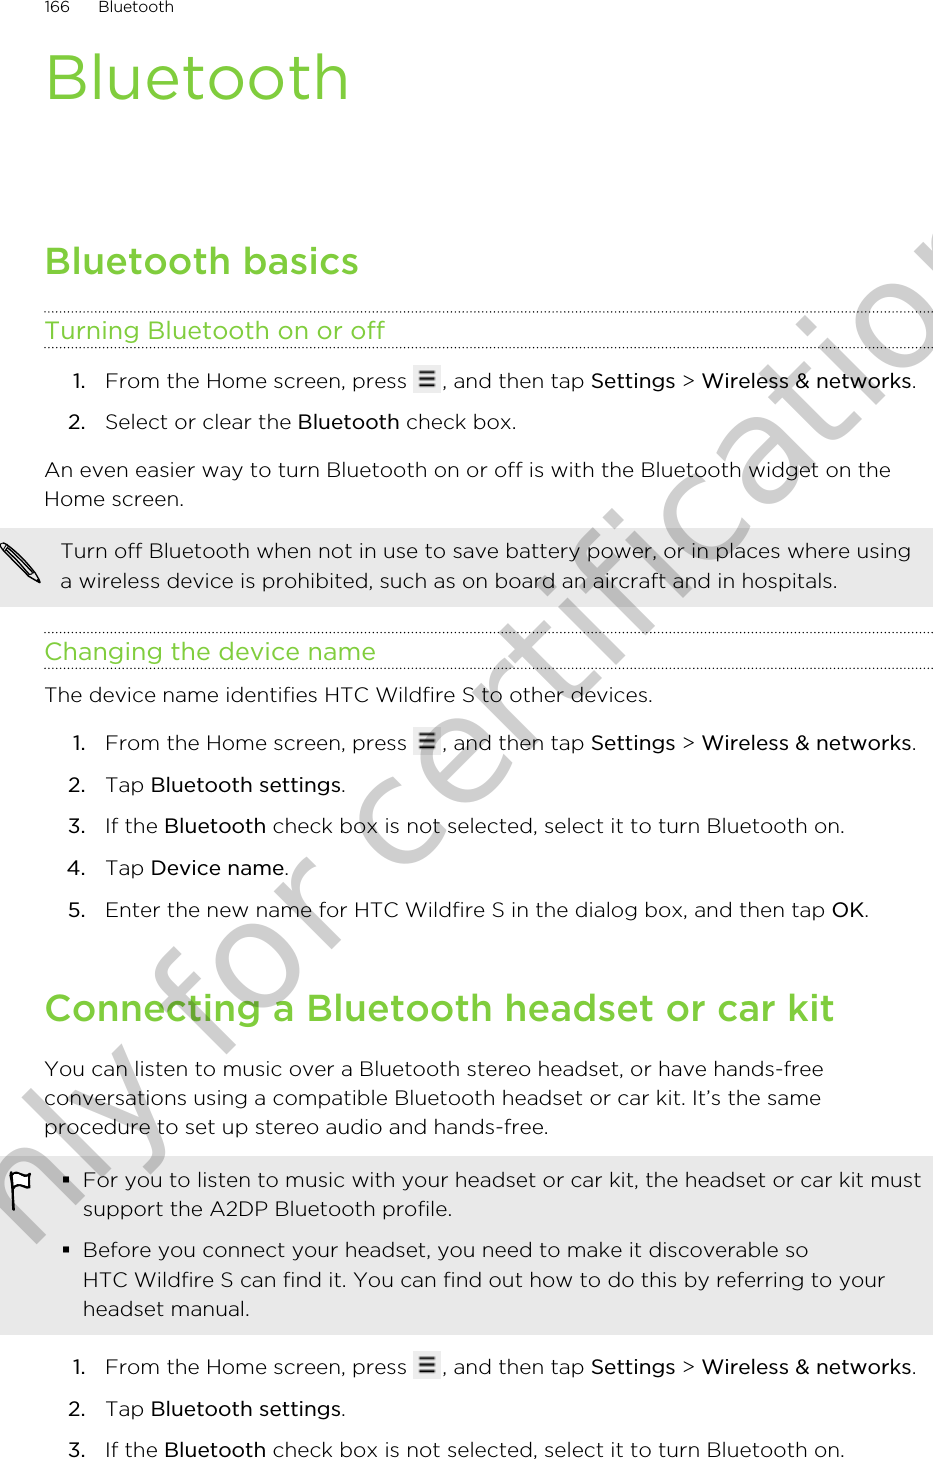 BluetoothBluetooth basicsTurning Bluetooth on or off1. From the Home screen, press  , and then tap Settings &gt; Wireless &amp; networks.2. Select or clear the Bluetooth check box.An even easier way to turn Bluetooth on or off is with the Bluetooth widget on theHome screen.Turn off Bluetooth when not in use to save battery power, or in places where usinga wireless device is prohibited, such as on board an aircraft and in hospitals.Changing the device nameThe device name identifies HTC Wildfire S to other devices.1. From the Home screen, press  , and then tap Settings &gt; Wireless &amp; networks.2. Tap Bluetooth settings.3. If the Bluetooth check box is not selected, select it to turn Bluetooth on.4. Tap Device name.5. Enter the new name for HTC Wildfire S in the dialog box, and then tap OK.Connecting a Bluetooth headset or car kitYou can listen to music over a Bluetooth stereo headset, or have hands-freeconversations using a compatible Bluetooth headset or car kit. It’s the sameprocedure to set up stereo audio and hands-free.§For you to listen to music with your headset or car kit, the headset or car kit mustsupport the A2DP Bluetooth profile.§Before you connect your headset, you need to make it discoverable soHTC Wildfire S can find it. You can find out how to do this by referring to yourheadset manual.1. From the Home screen, press  , and then tap Settings &gt; Wireless &amp; networks.2. Tap Bluetooth settings.3. If the Bluetooth check box is not selected, select it to turn Bluetooth on.166 BluetoothOnly for certification